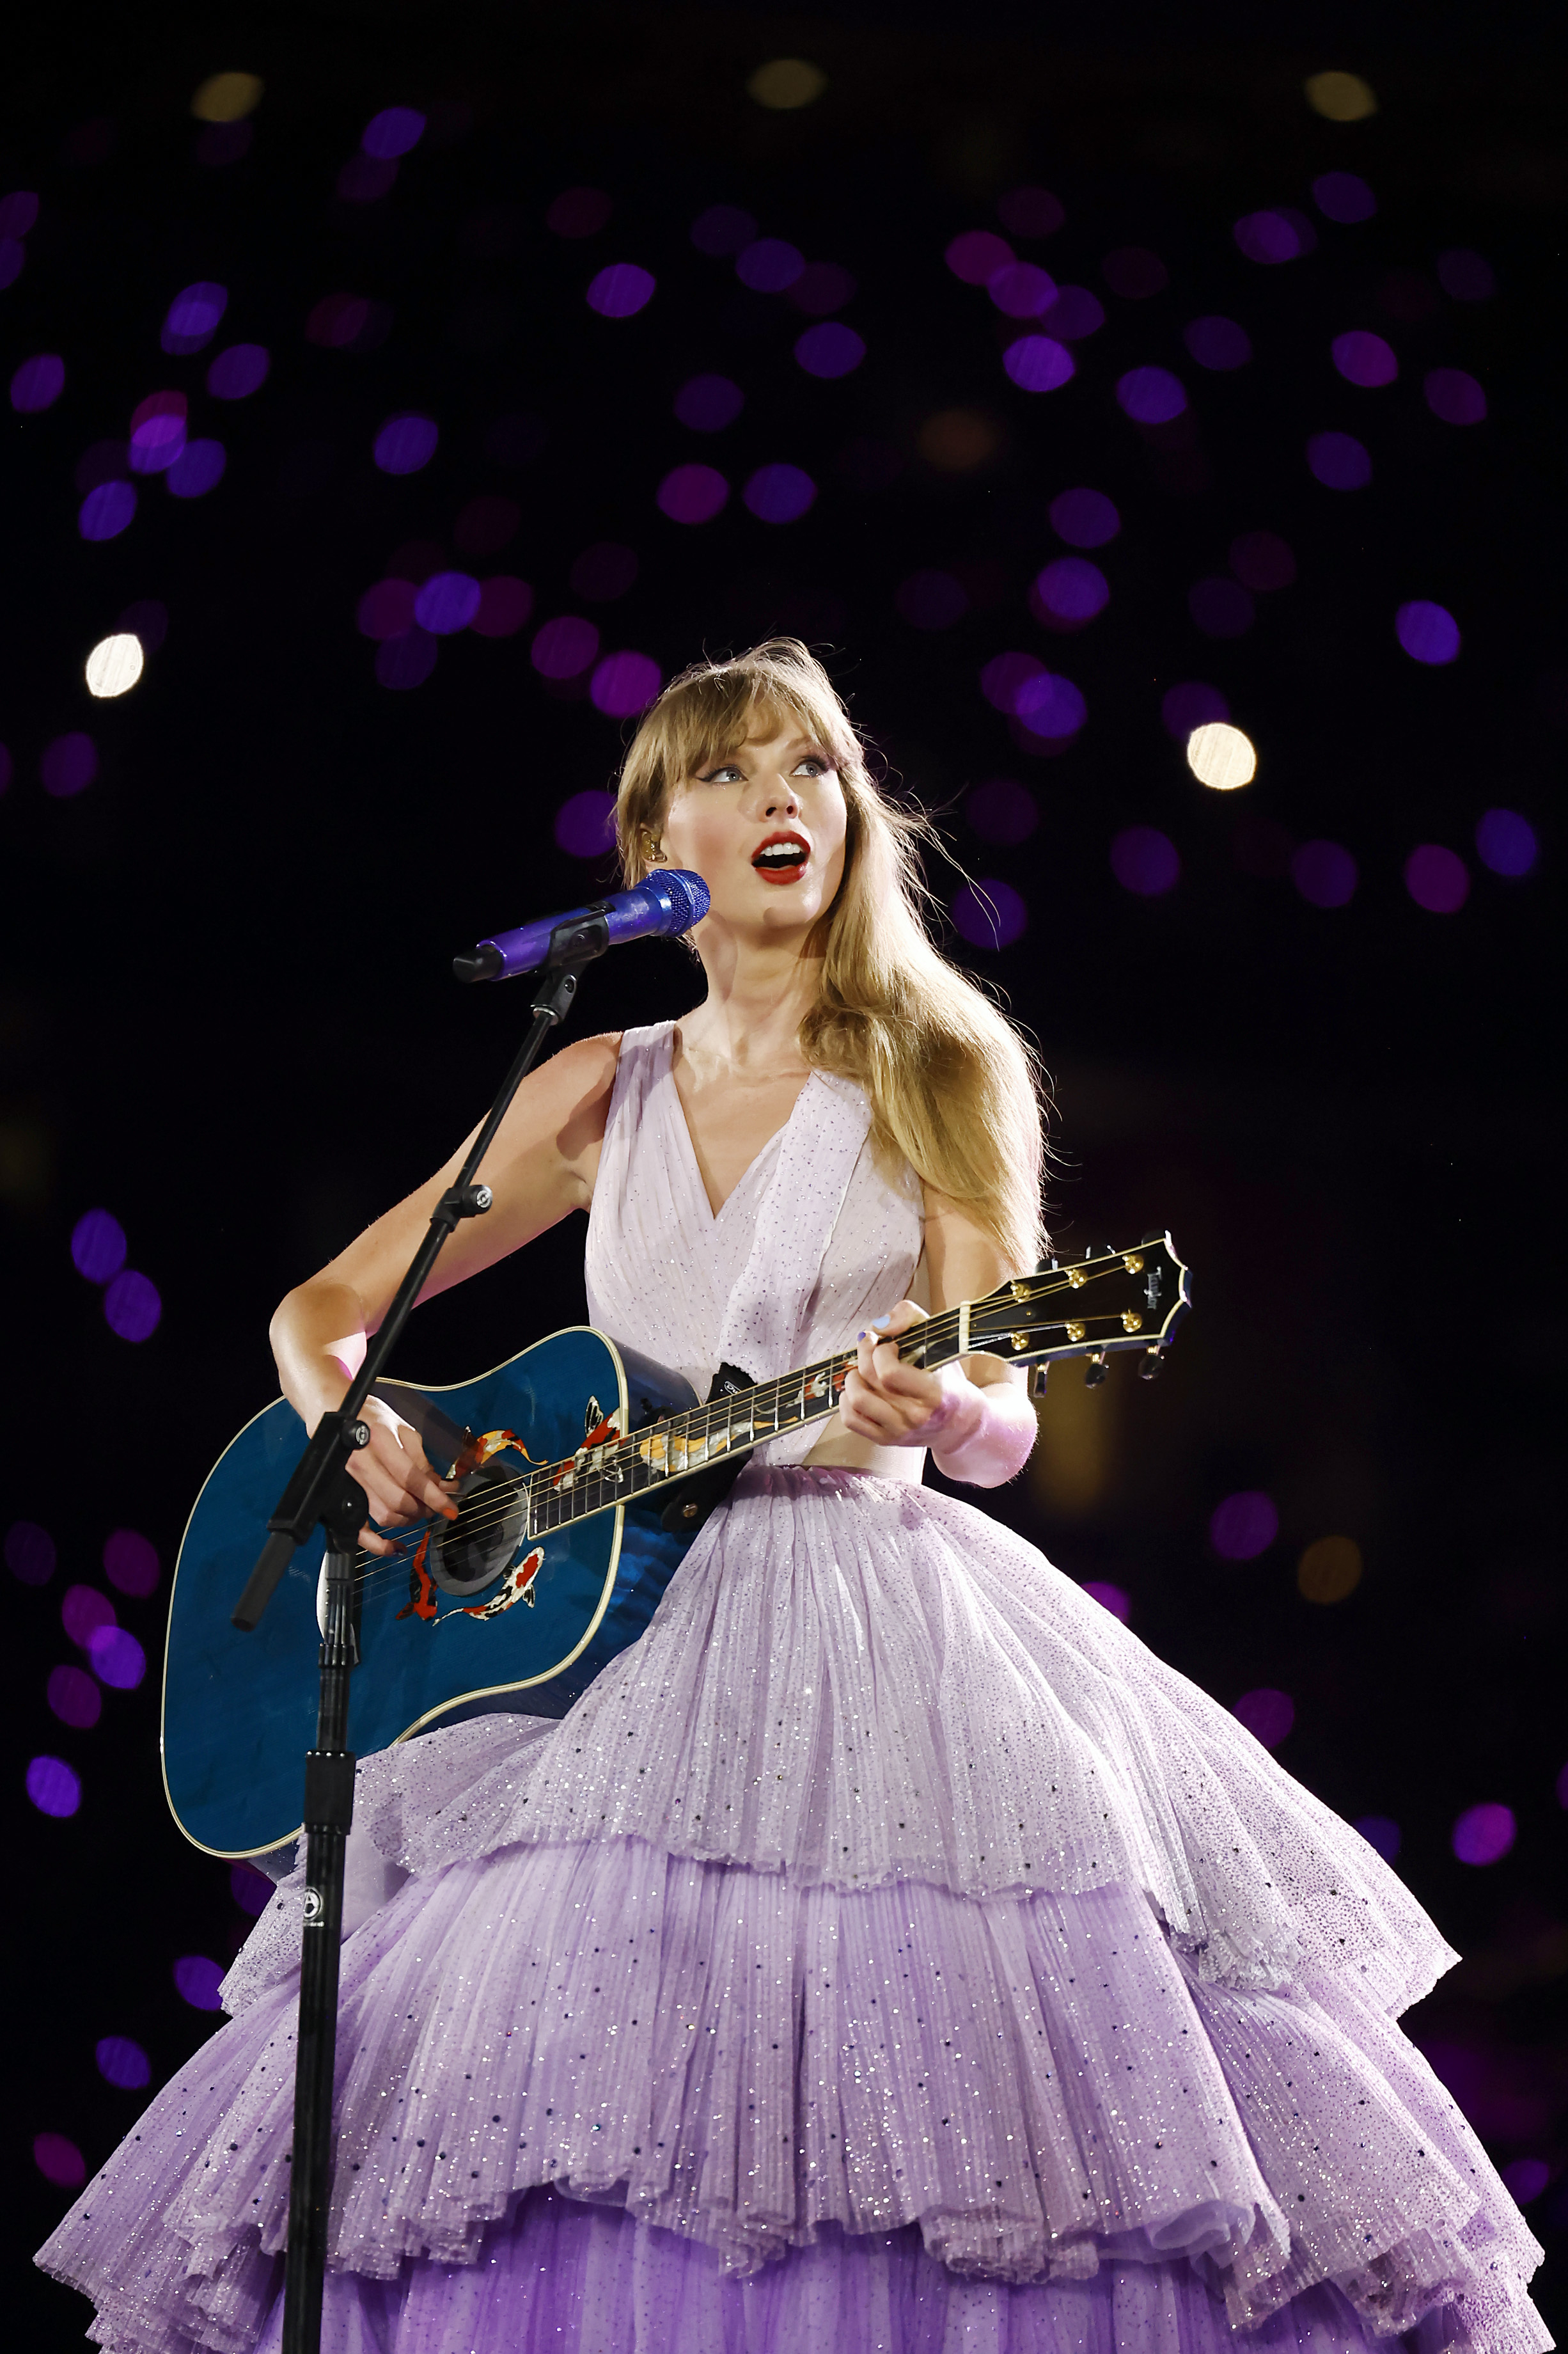 Taylor Swift performing on stage with a guitar, wearing a sparkling ball gown